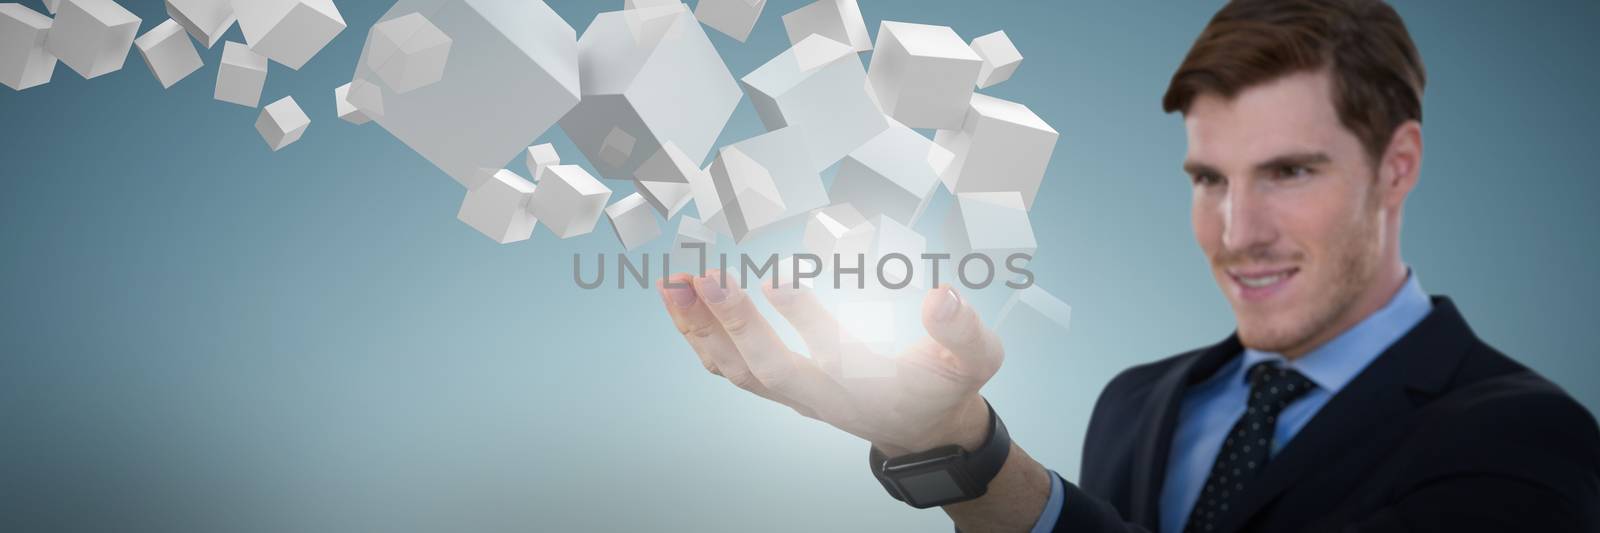 Close-up of businessman presenting object against abstract grey background